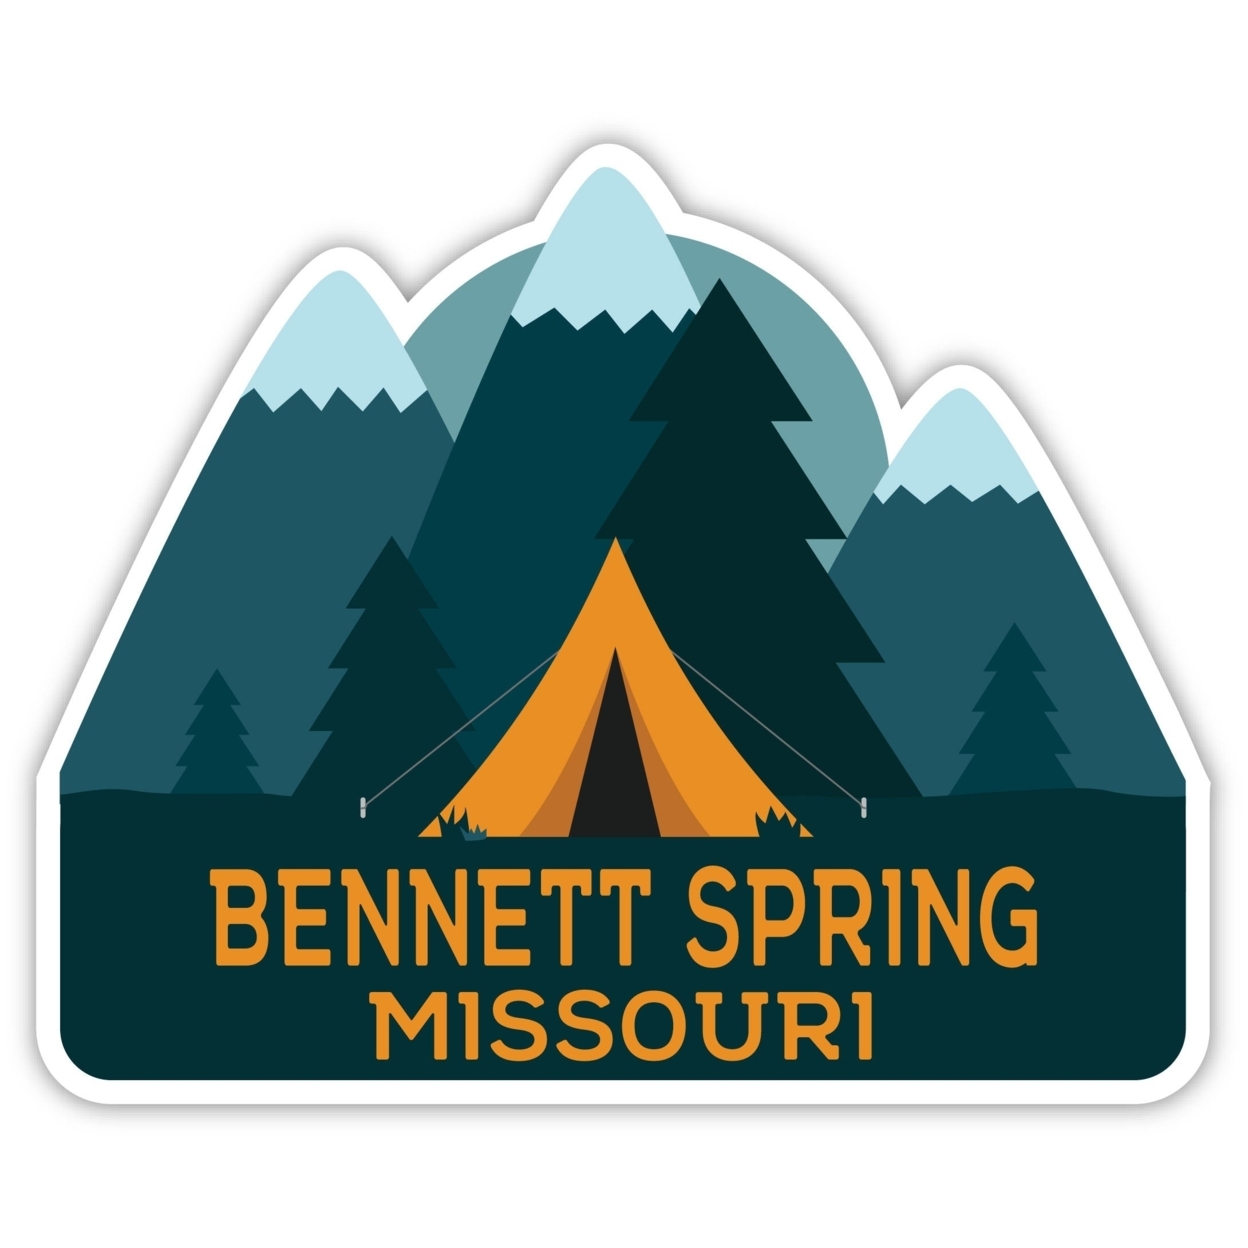 Bennett Spring Missouri Souvenir Decorative Stickers (Choose Theme And Size) - 4-Pack, 4-Inch, Tent